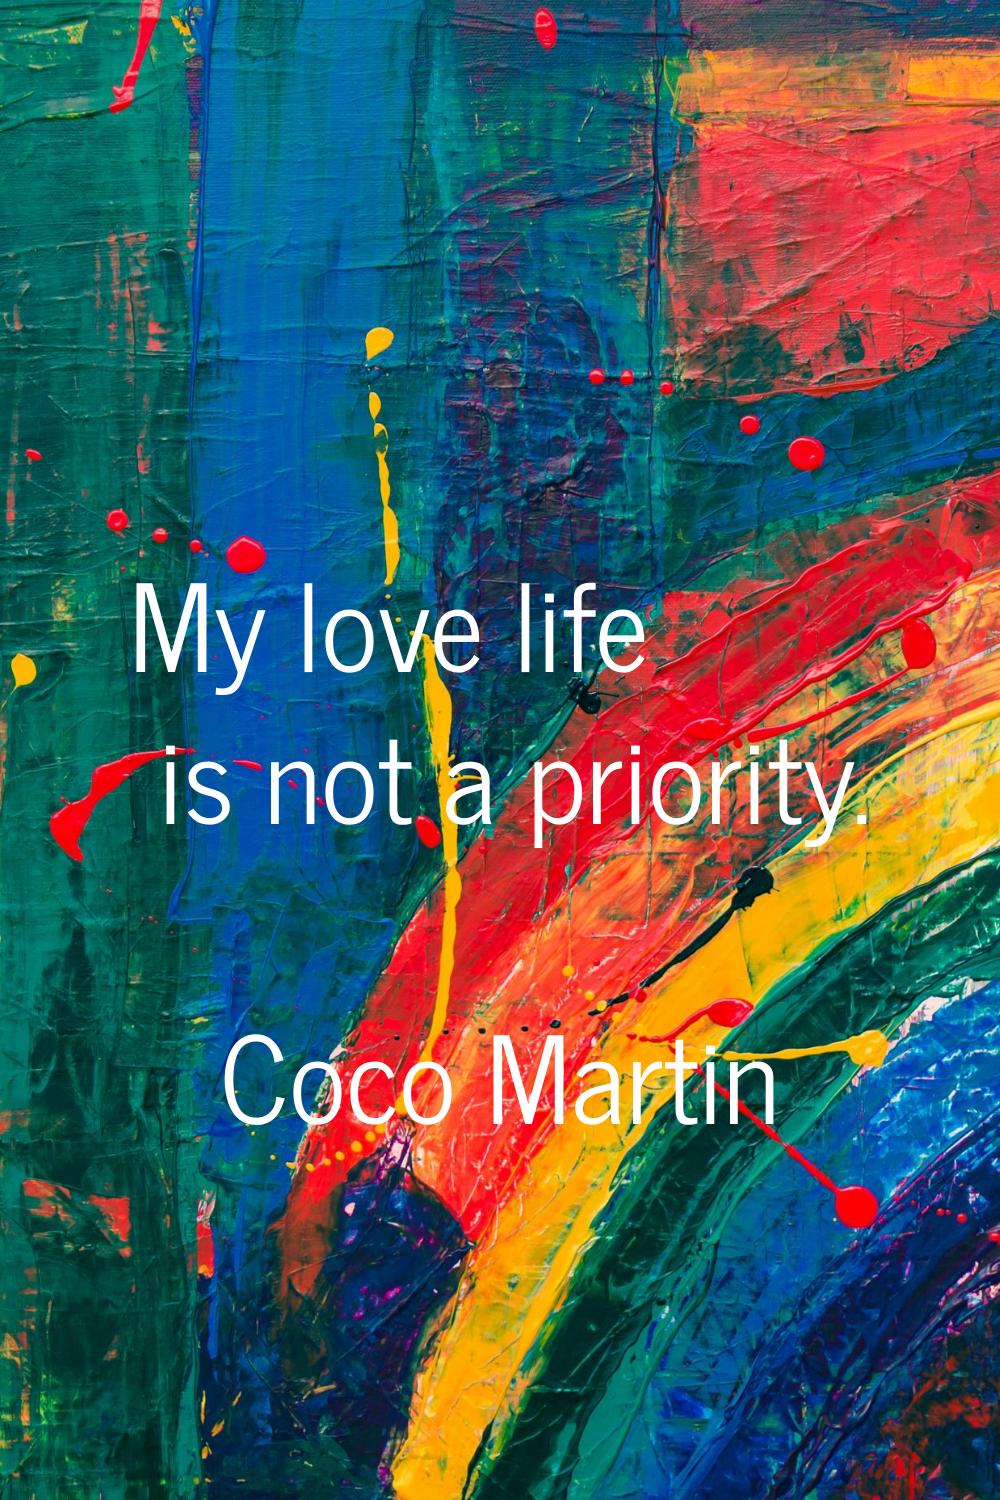 My love life is not a priority.